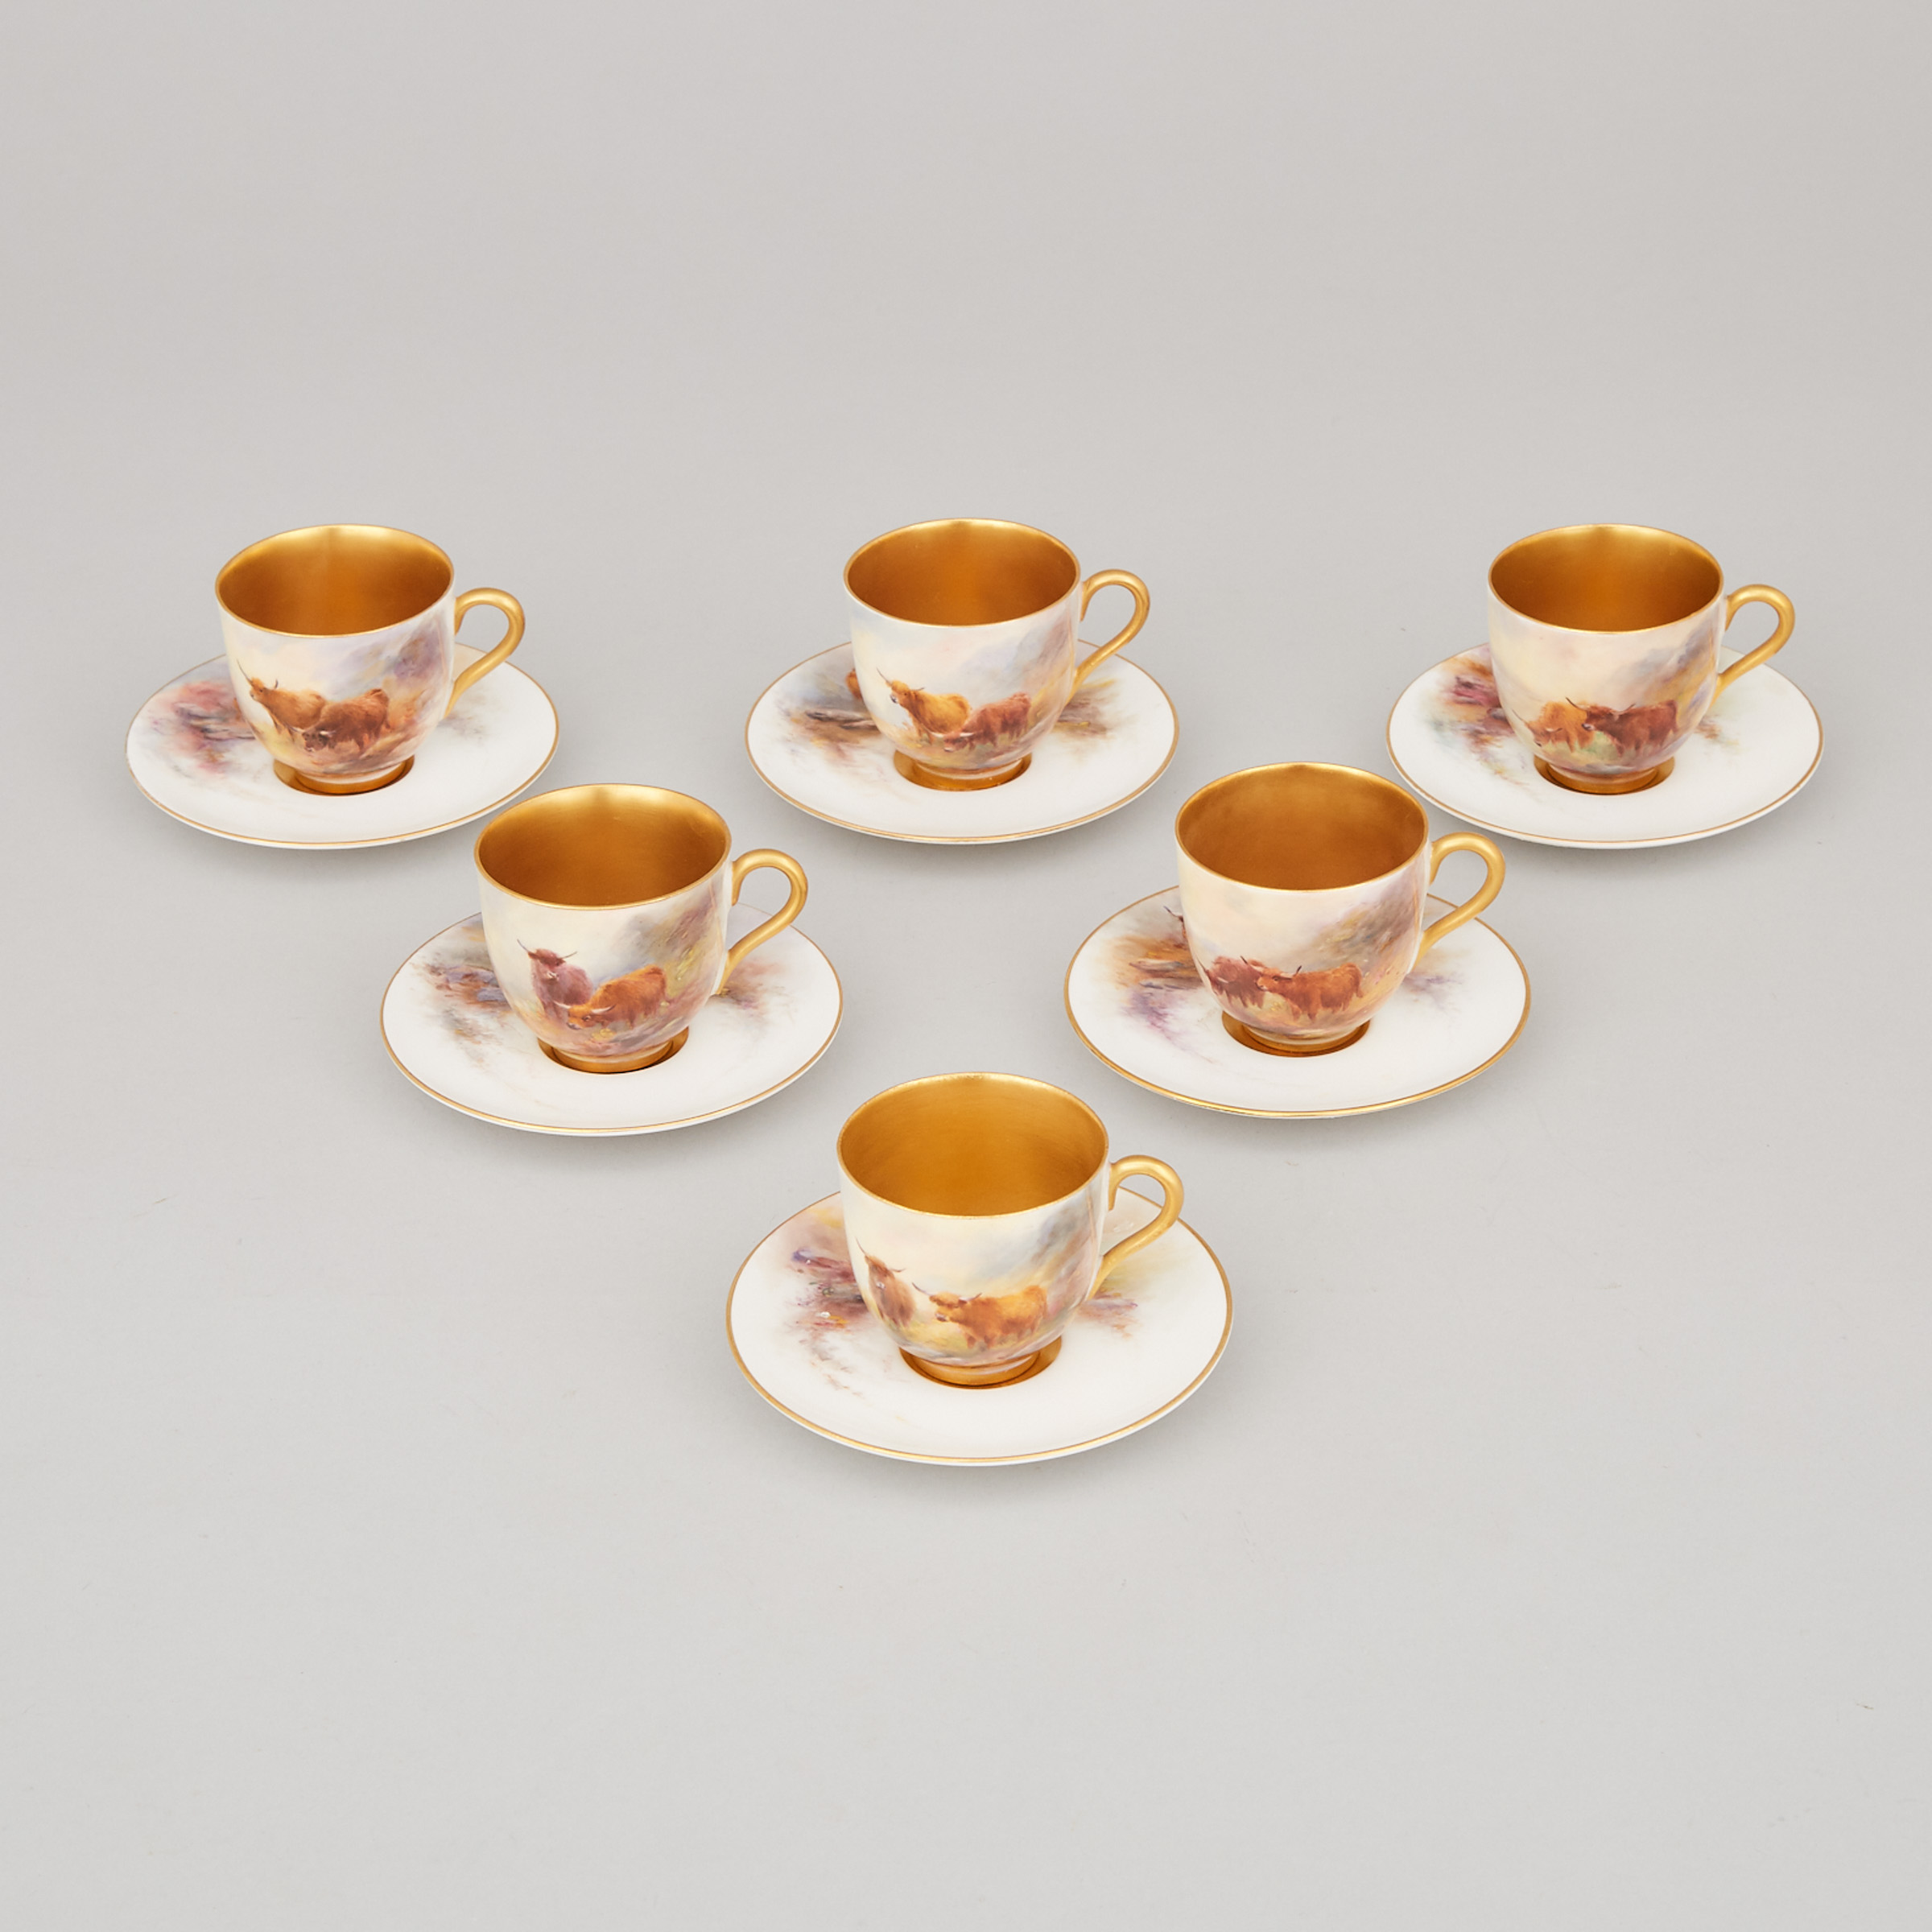 Six Royal Worcester Coffee Cups and Saucers, Harry Stinton, 1912-13